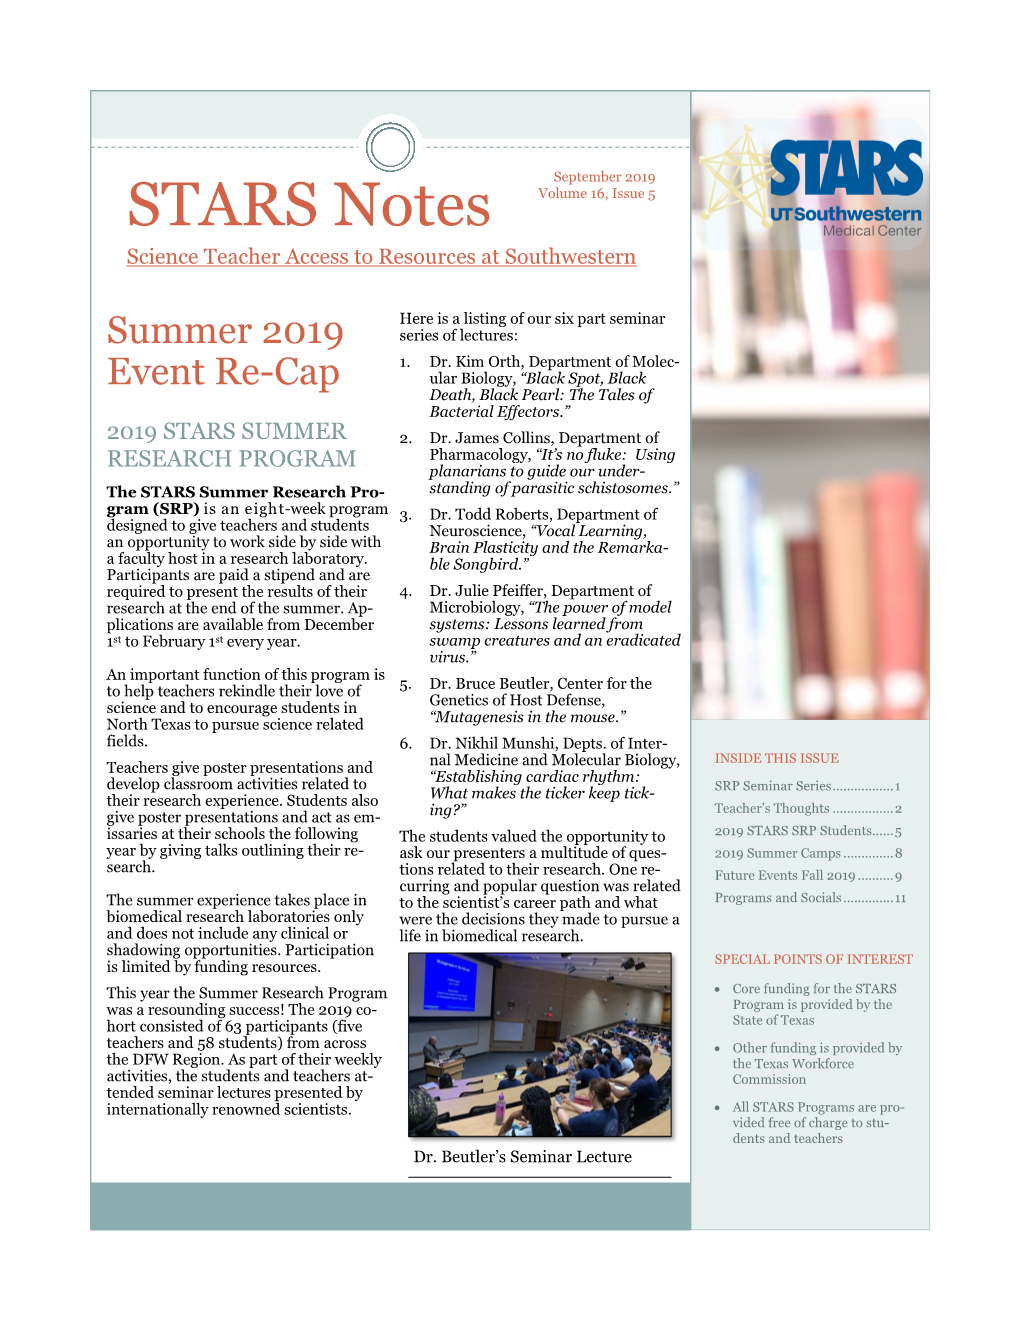 STARS Notes Volume 16, Issue 5 Science Teacher Access to Resources at Southwestern